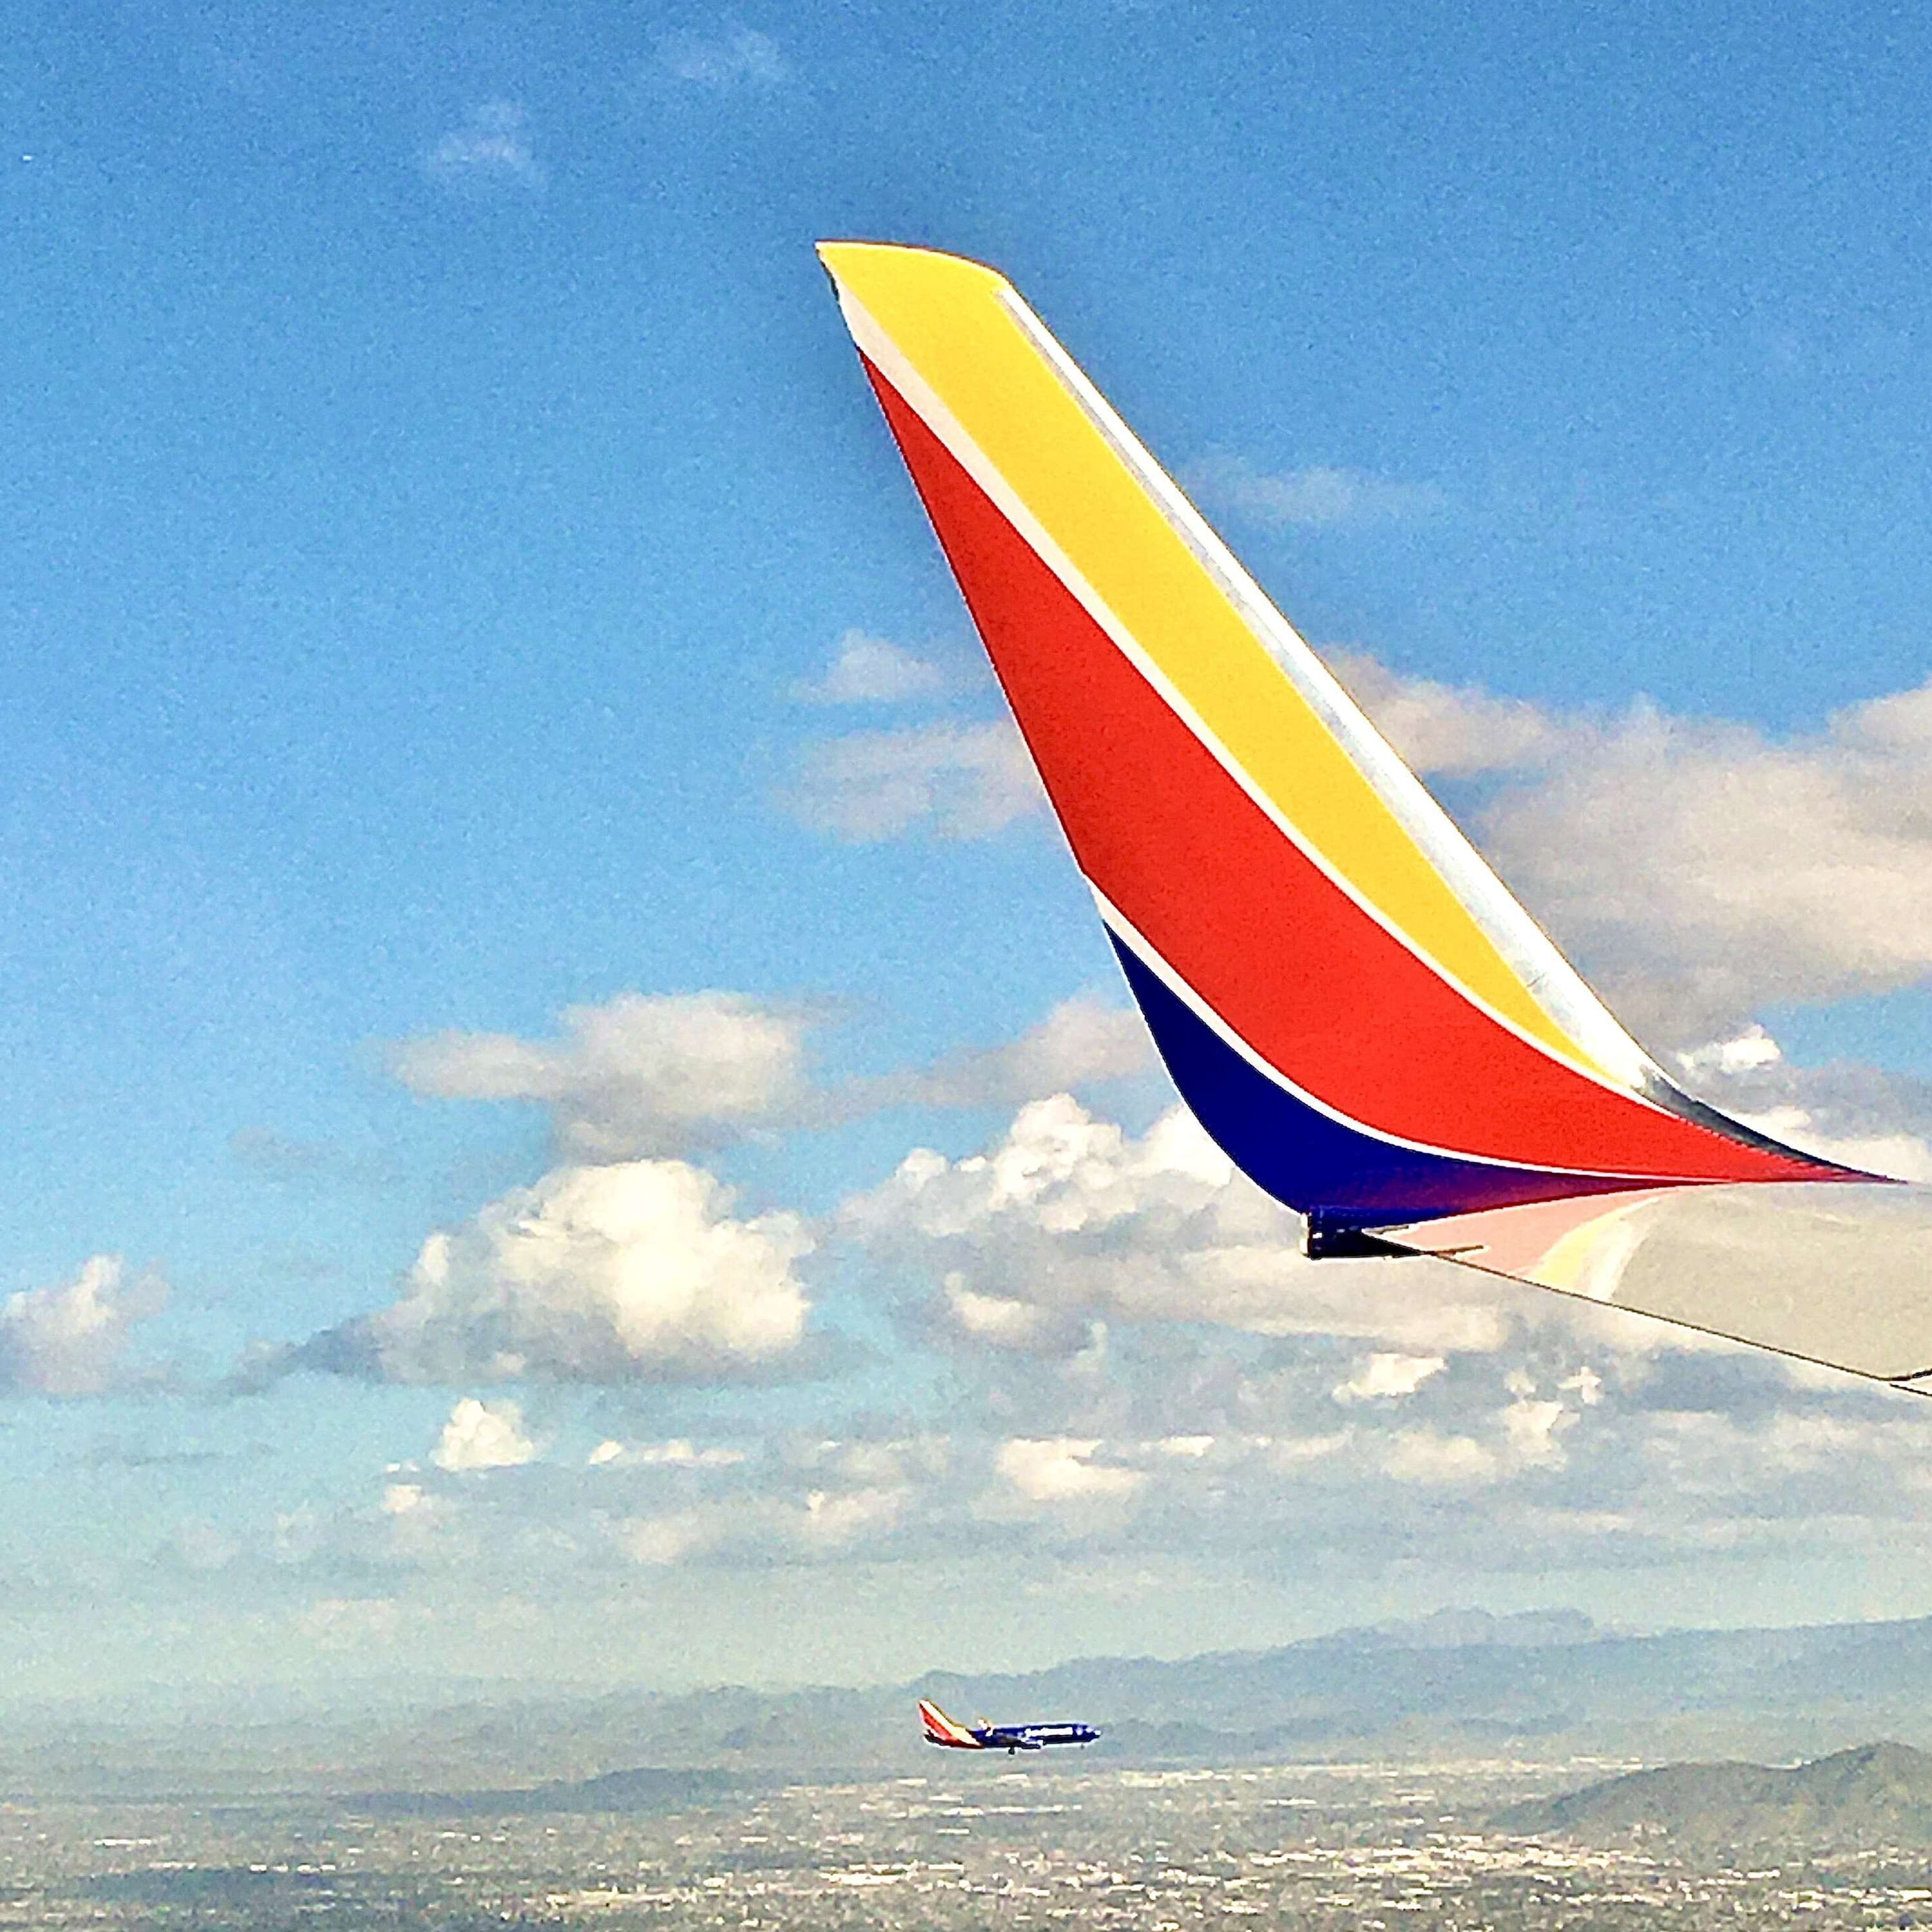 27 | Earn Southwest Points Without Paying for Flights! 10 Ways to Boost Your Account